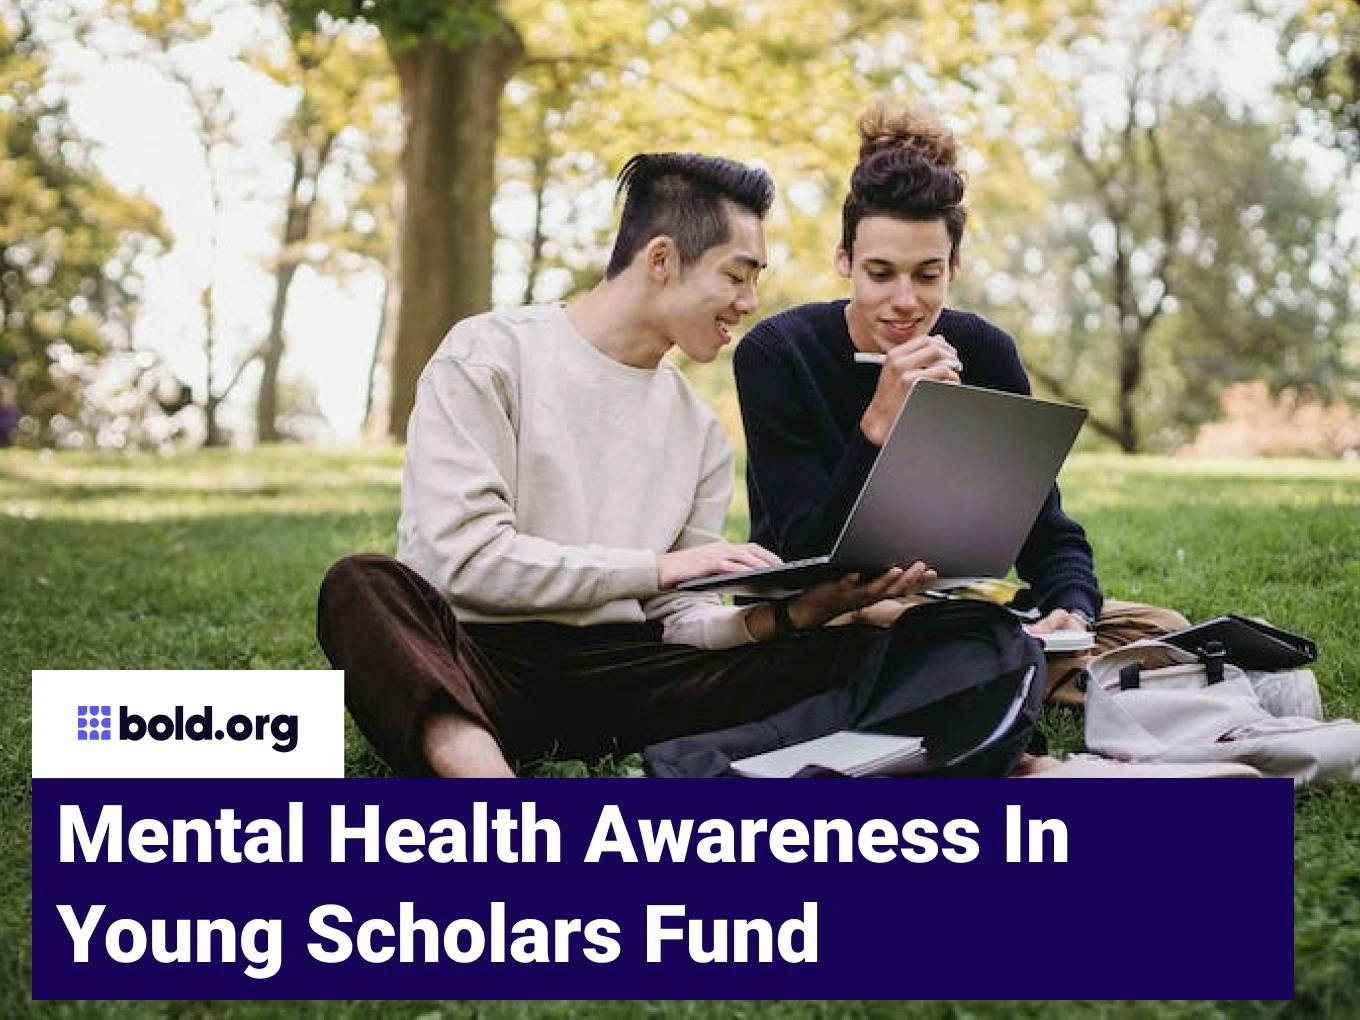 Mental Health Awareness in Young Scholars Fund